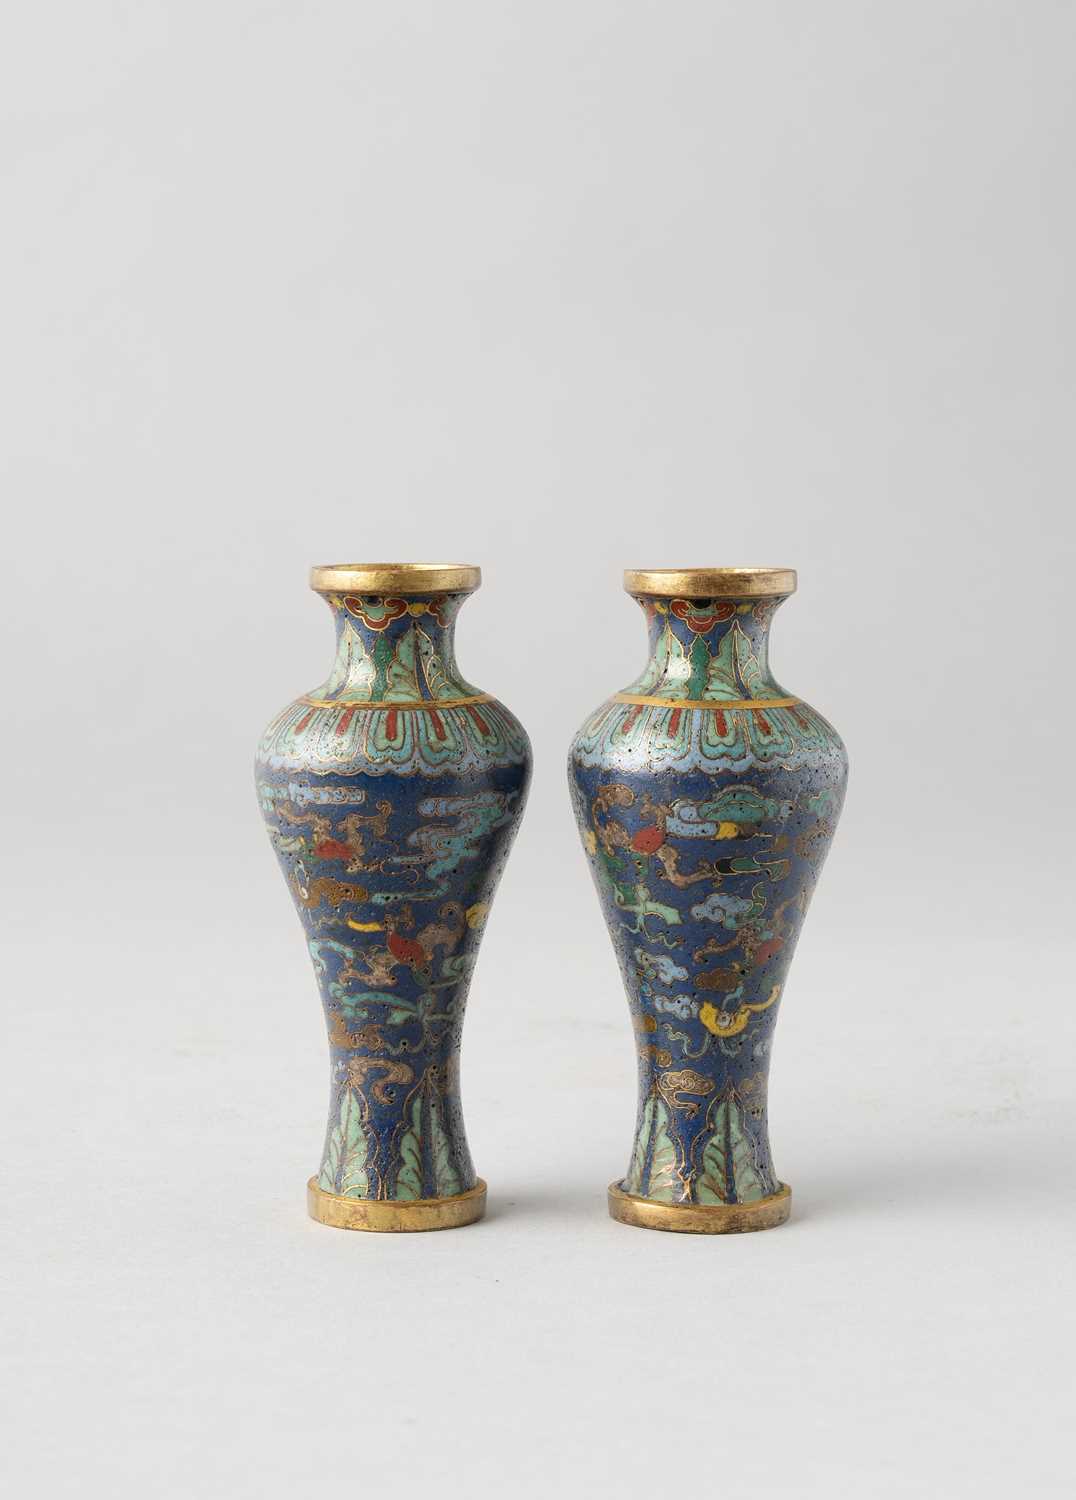 A SMALL PAIR OF CHINESE CLOISONNE ENAMEL 'BATS' VASES 18TH CENTURY The baluster-shaped bodies